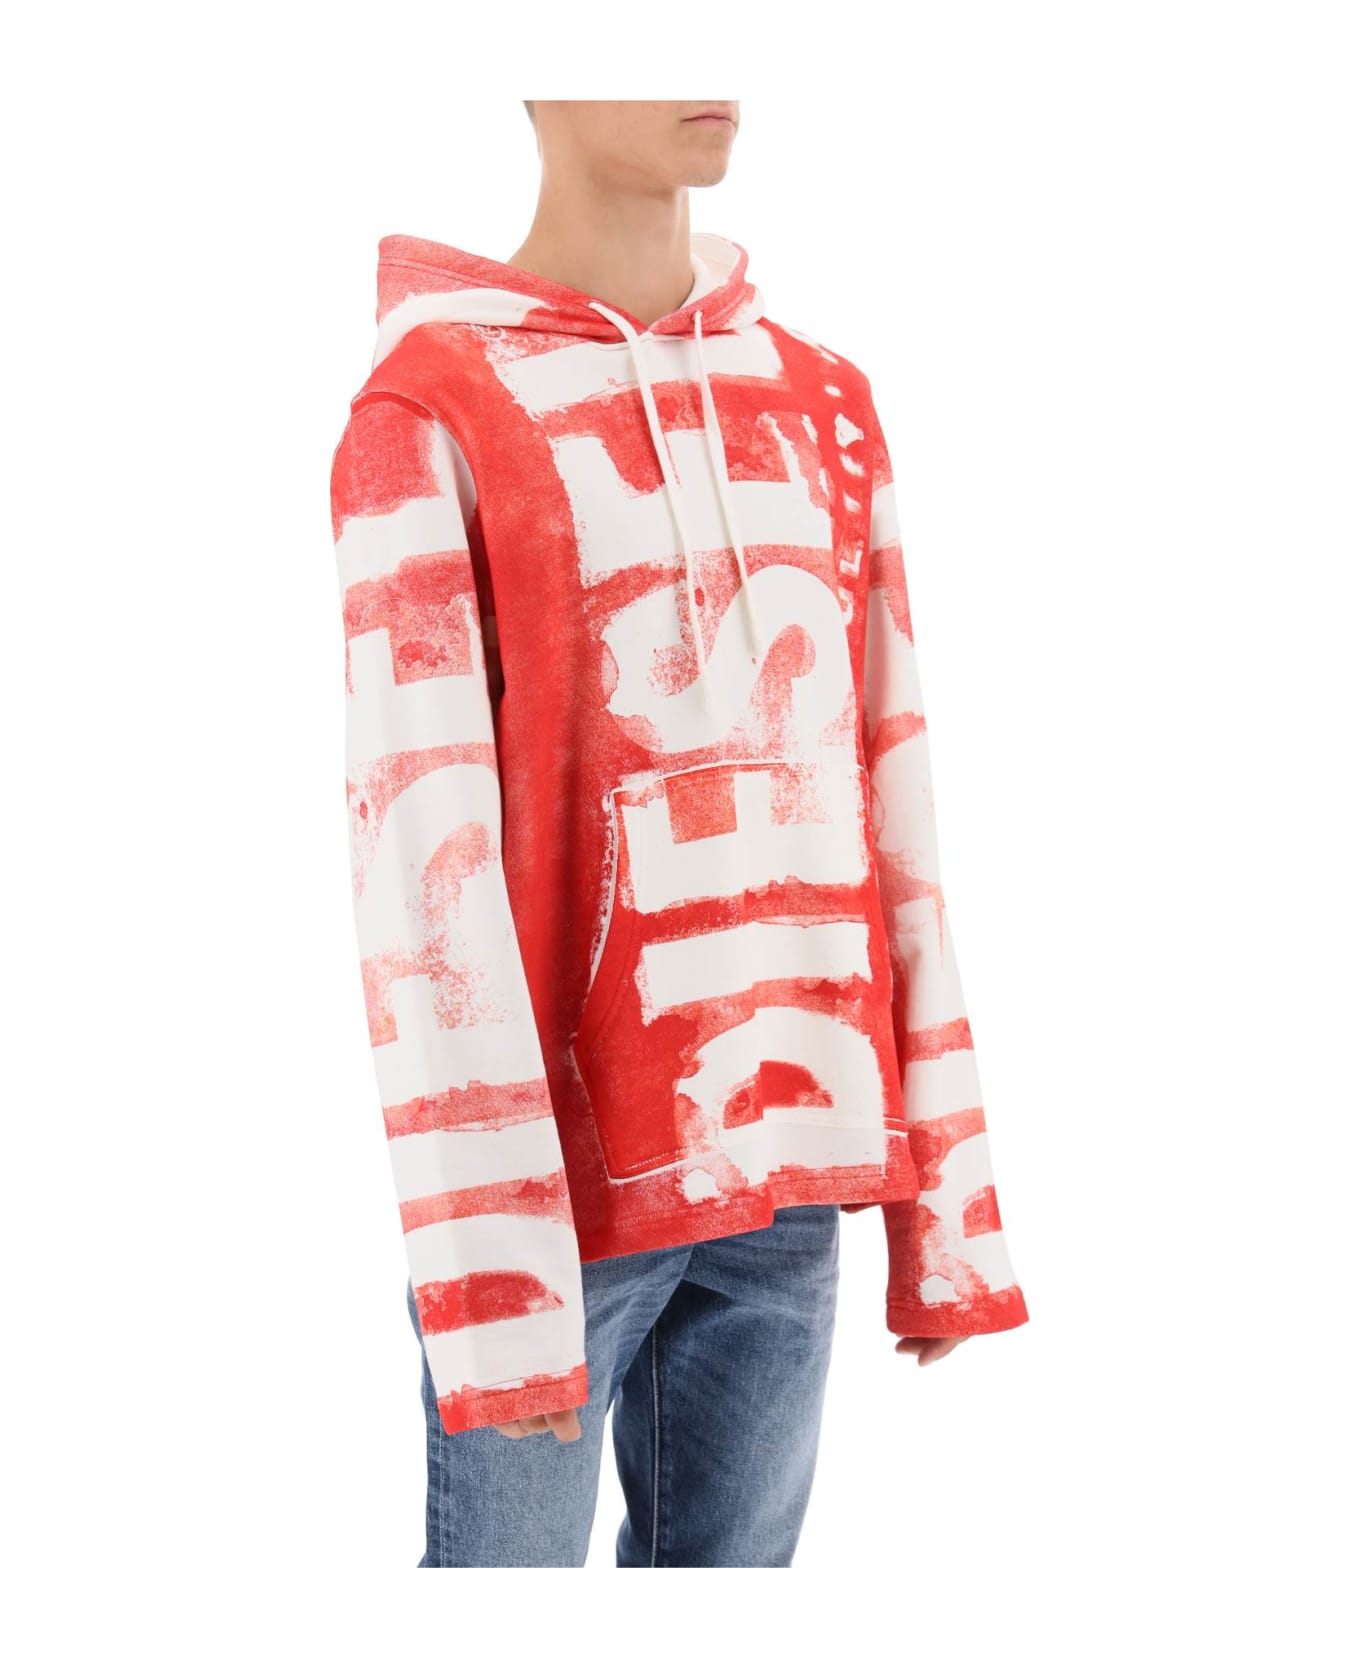 Diesel S-giny Hoodie - BRIGHT RED (White)